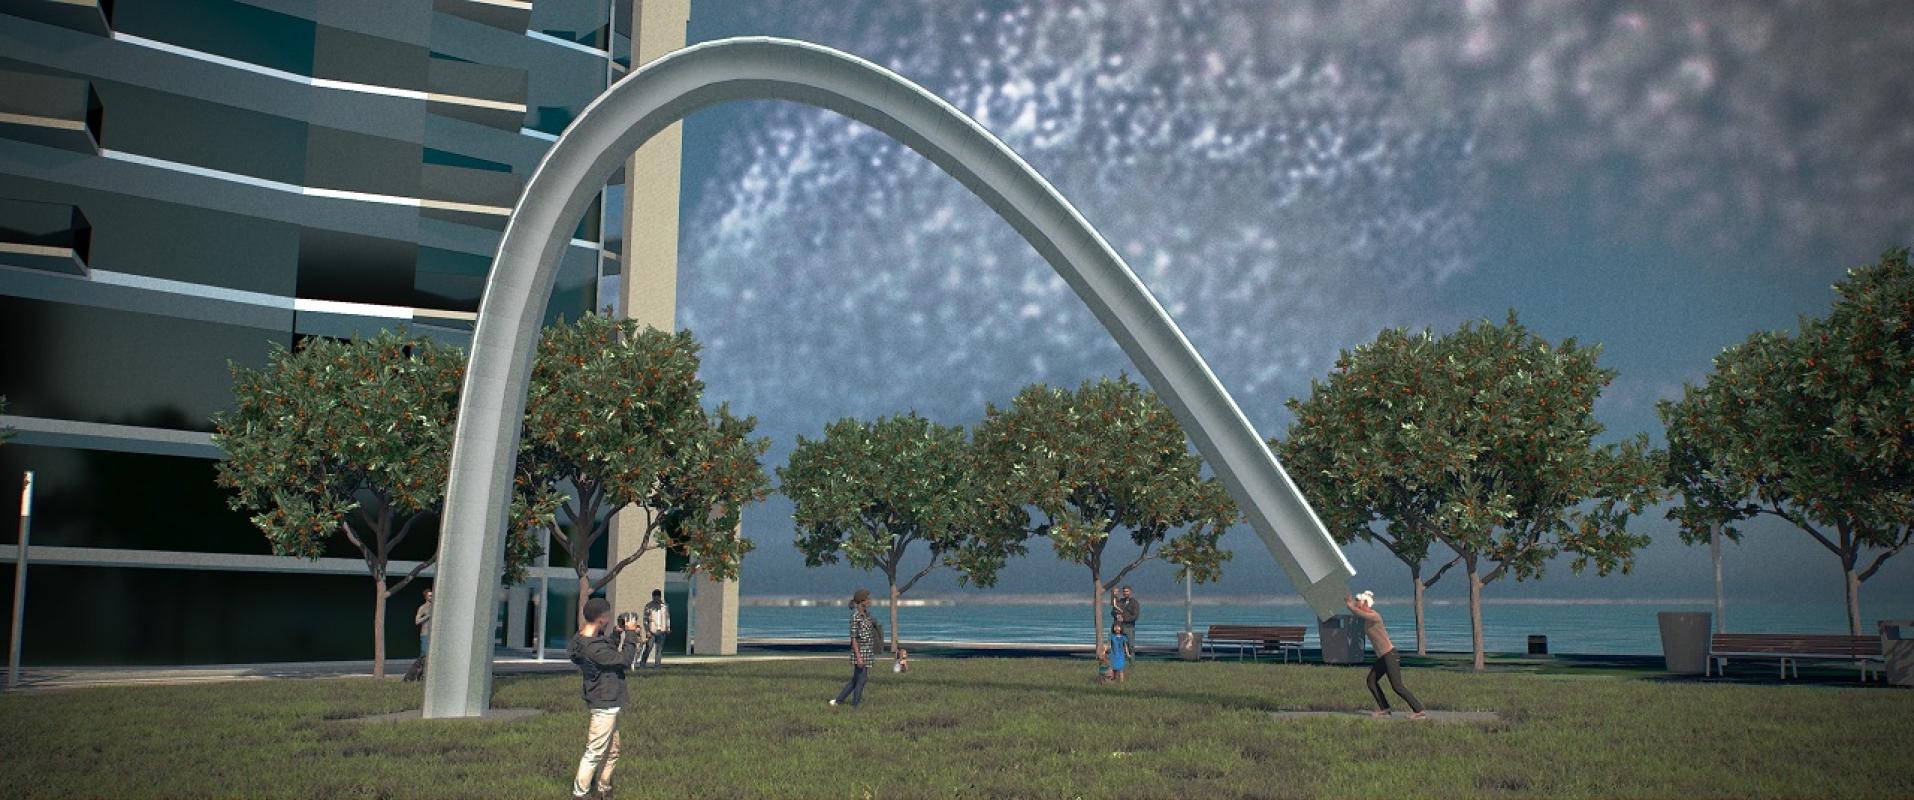 Artist rendering of a large arch as public art in a waterfront park.